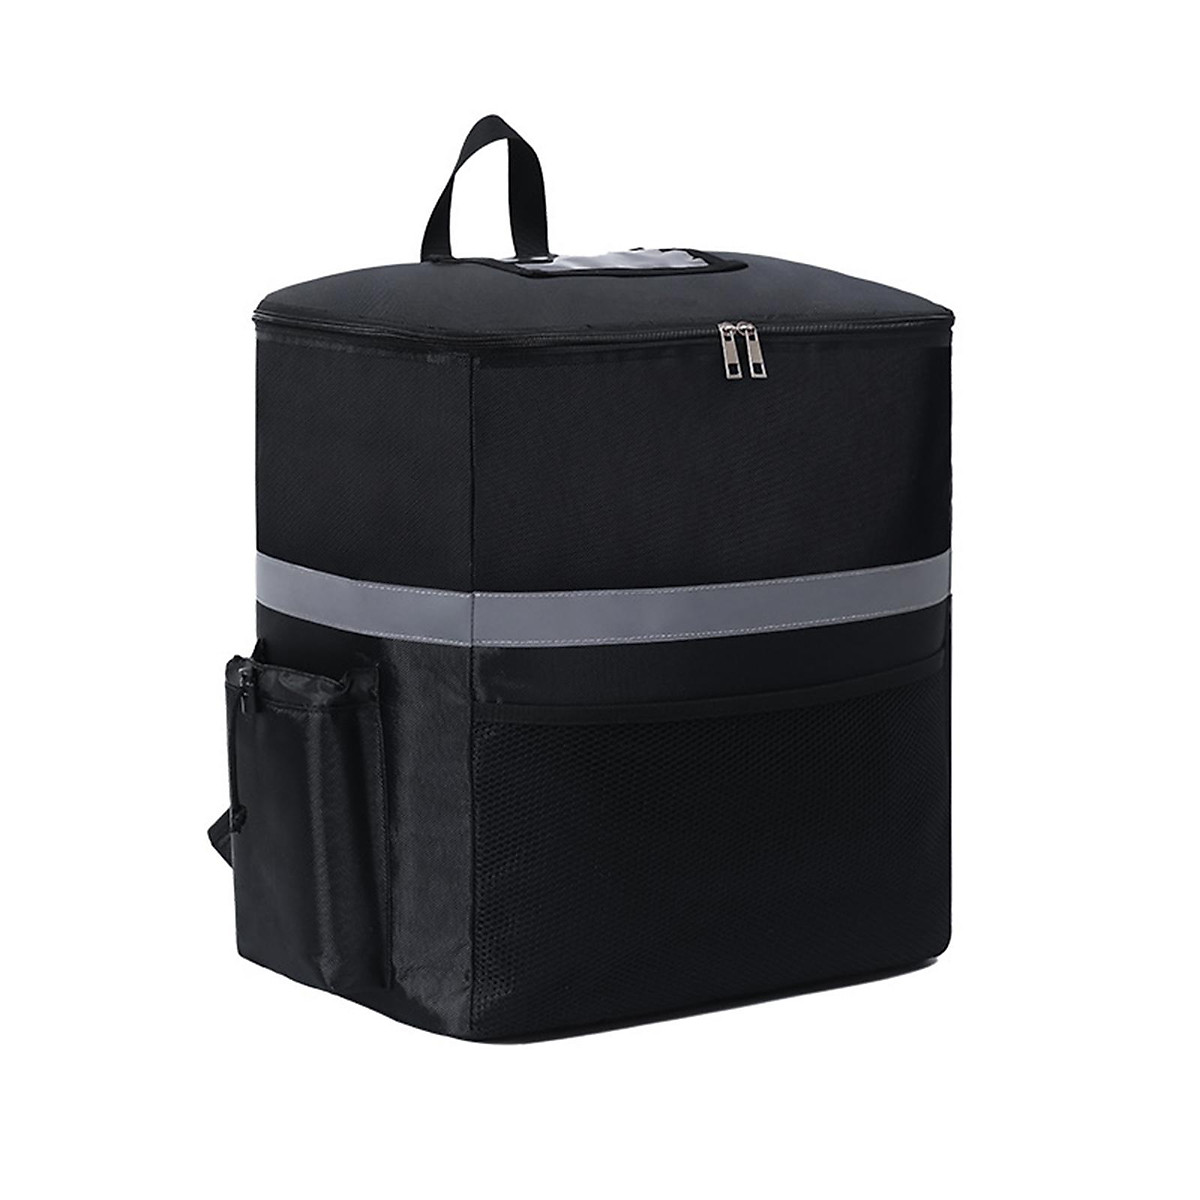 Fashion Lunch Box Bag Multi-functional, Long Time Cooler Bag, Large Size 2  Layers Insulated Cooler